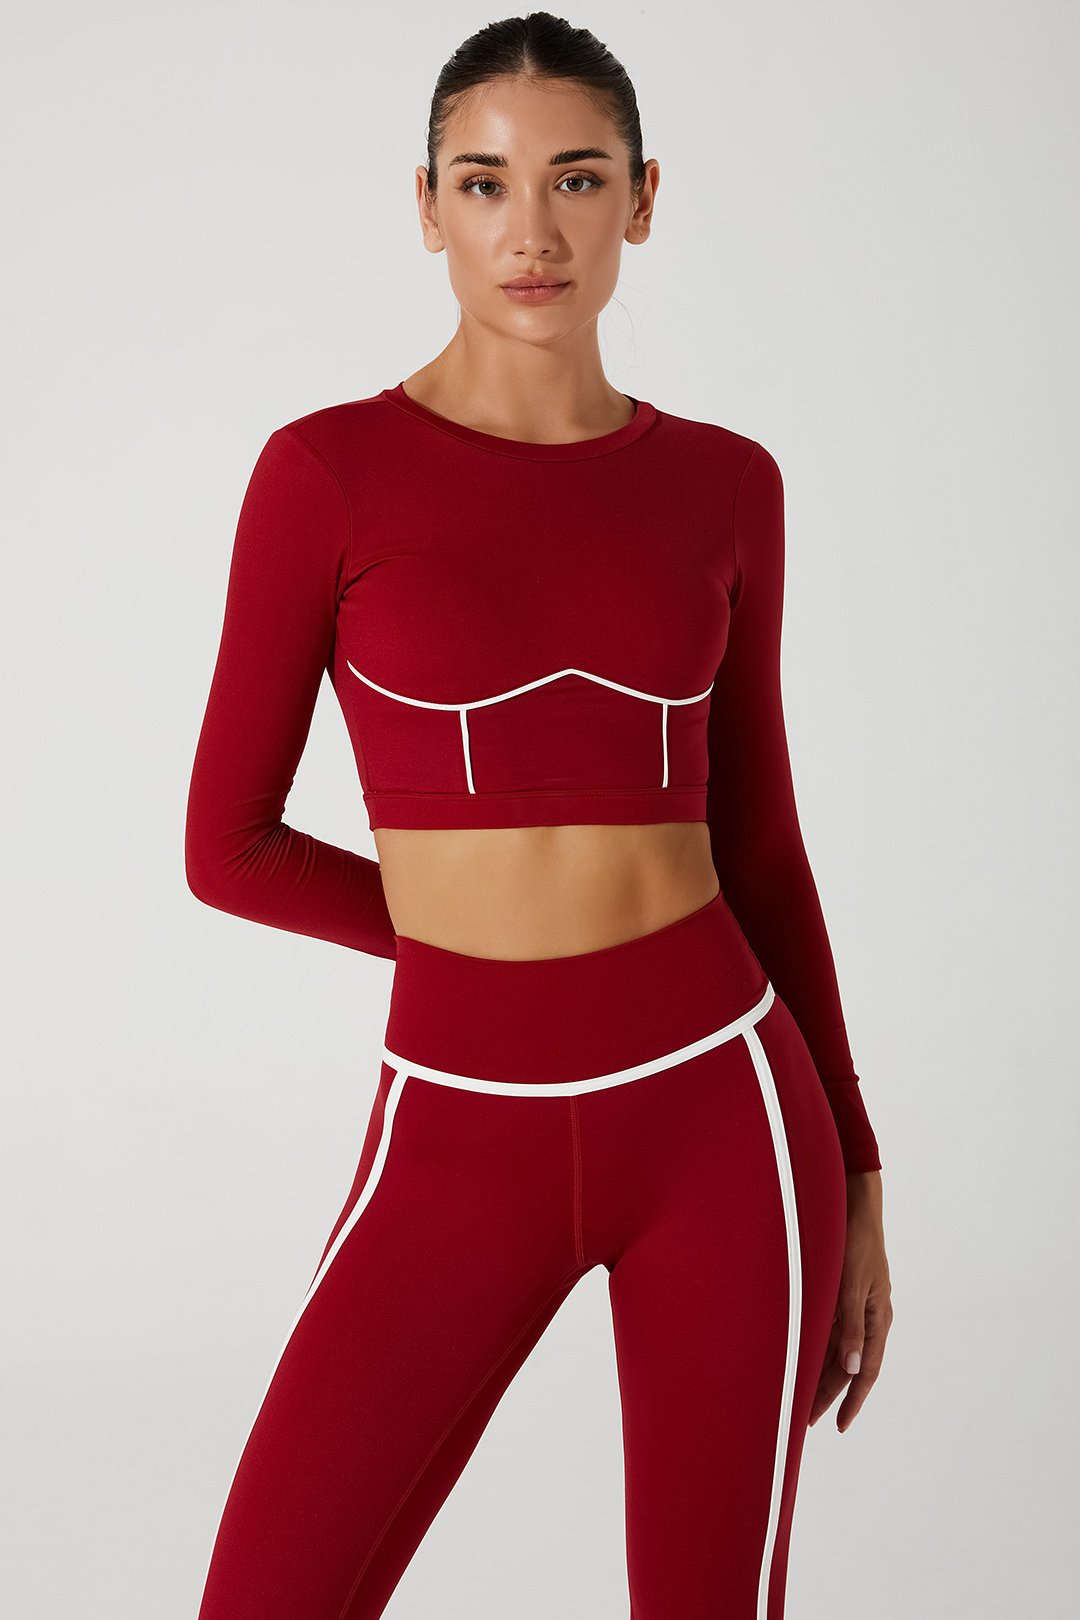 Stylish magenta red Clio long sleeve women's bra, perfect for a vibrant and confident look.